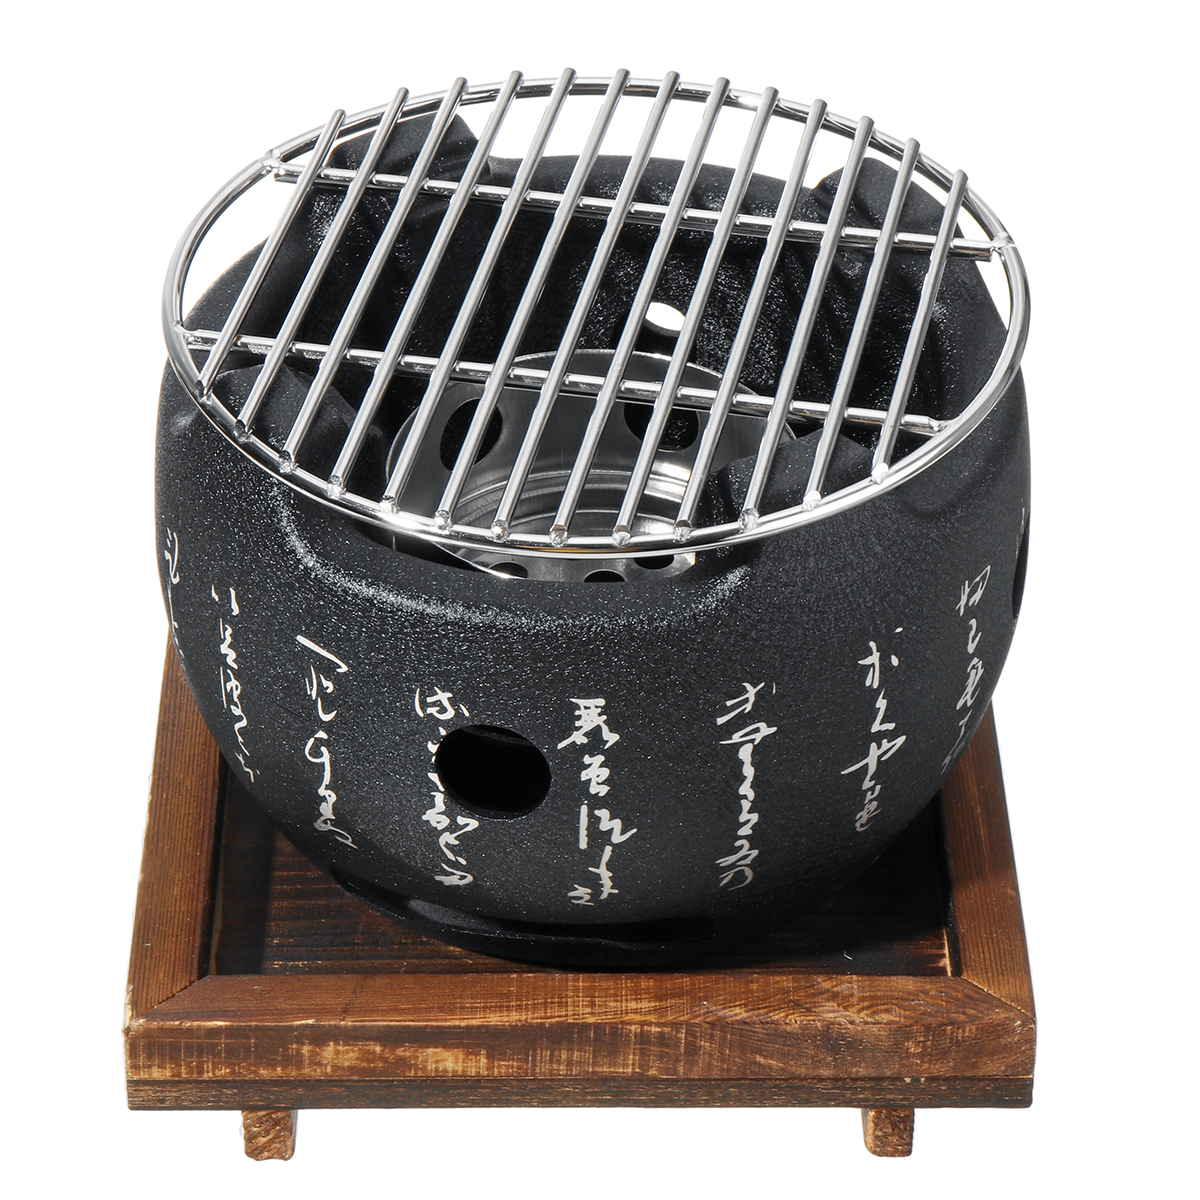 BBQ Grill Charcoal Grill Japanese Style Aluminium Alloy Portable Barbecue eddiestore2008 - image 2 of 11